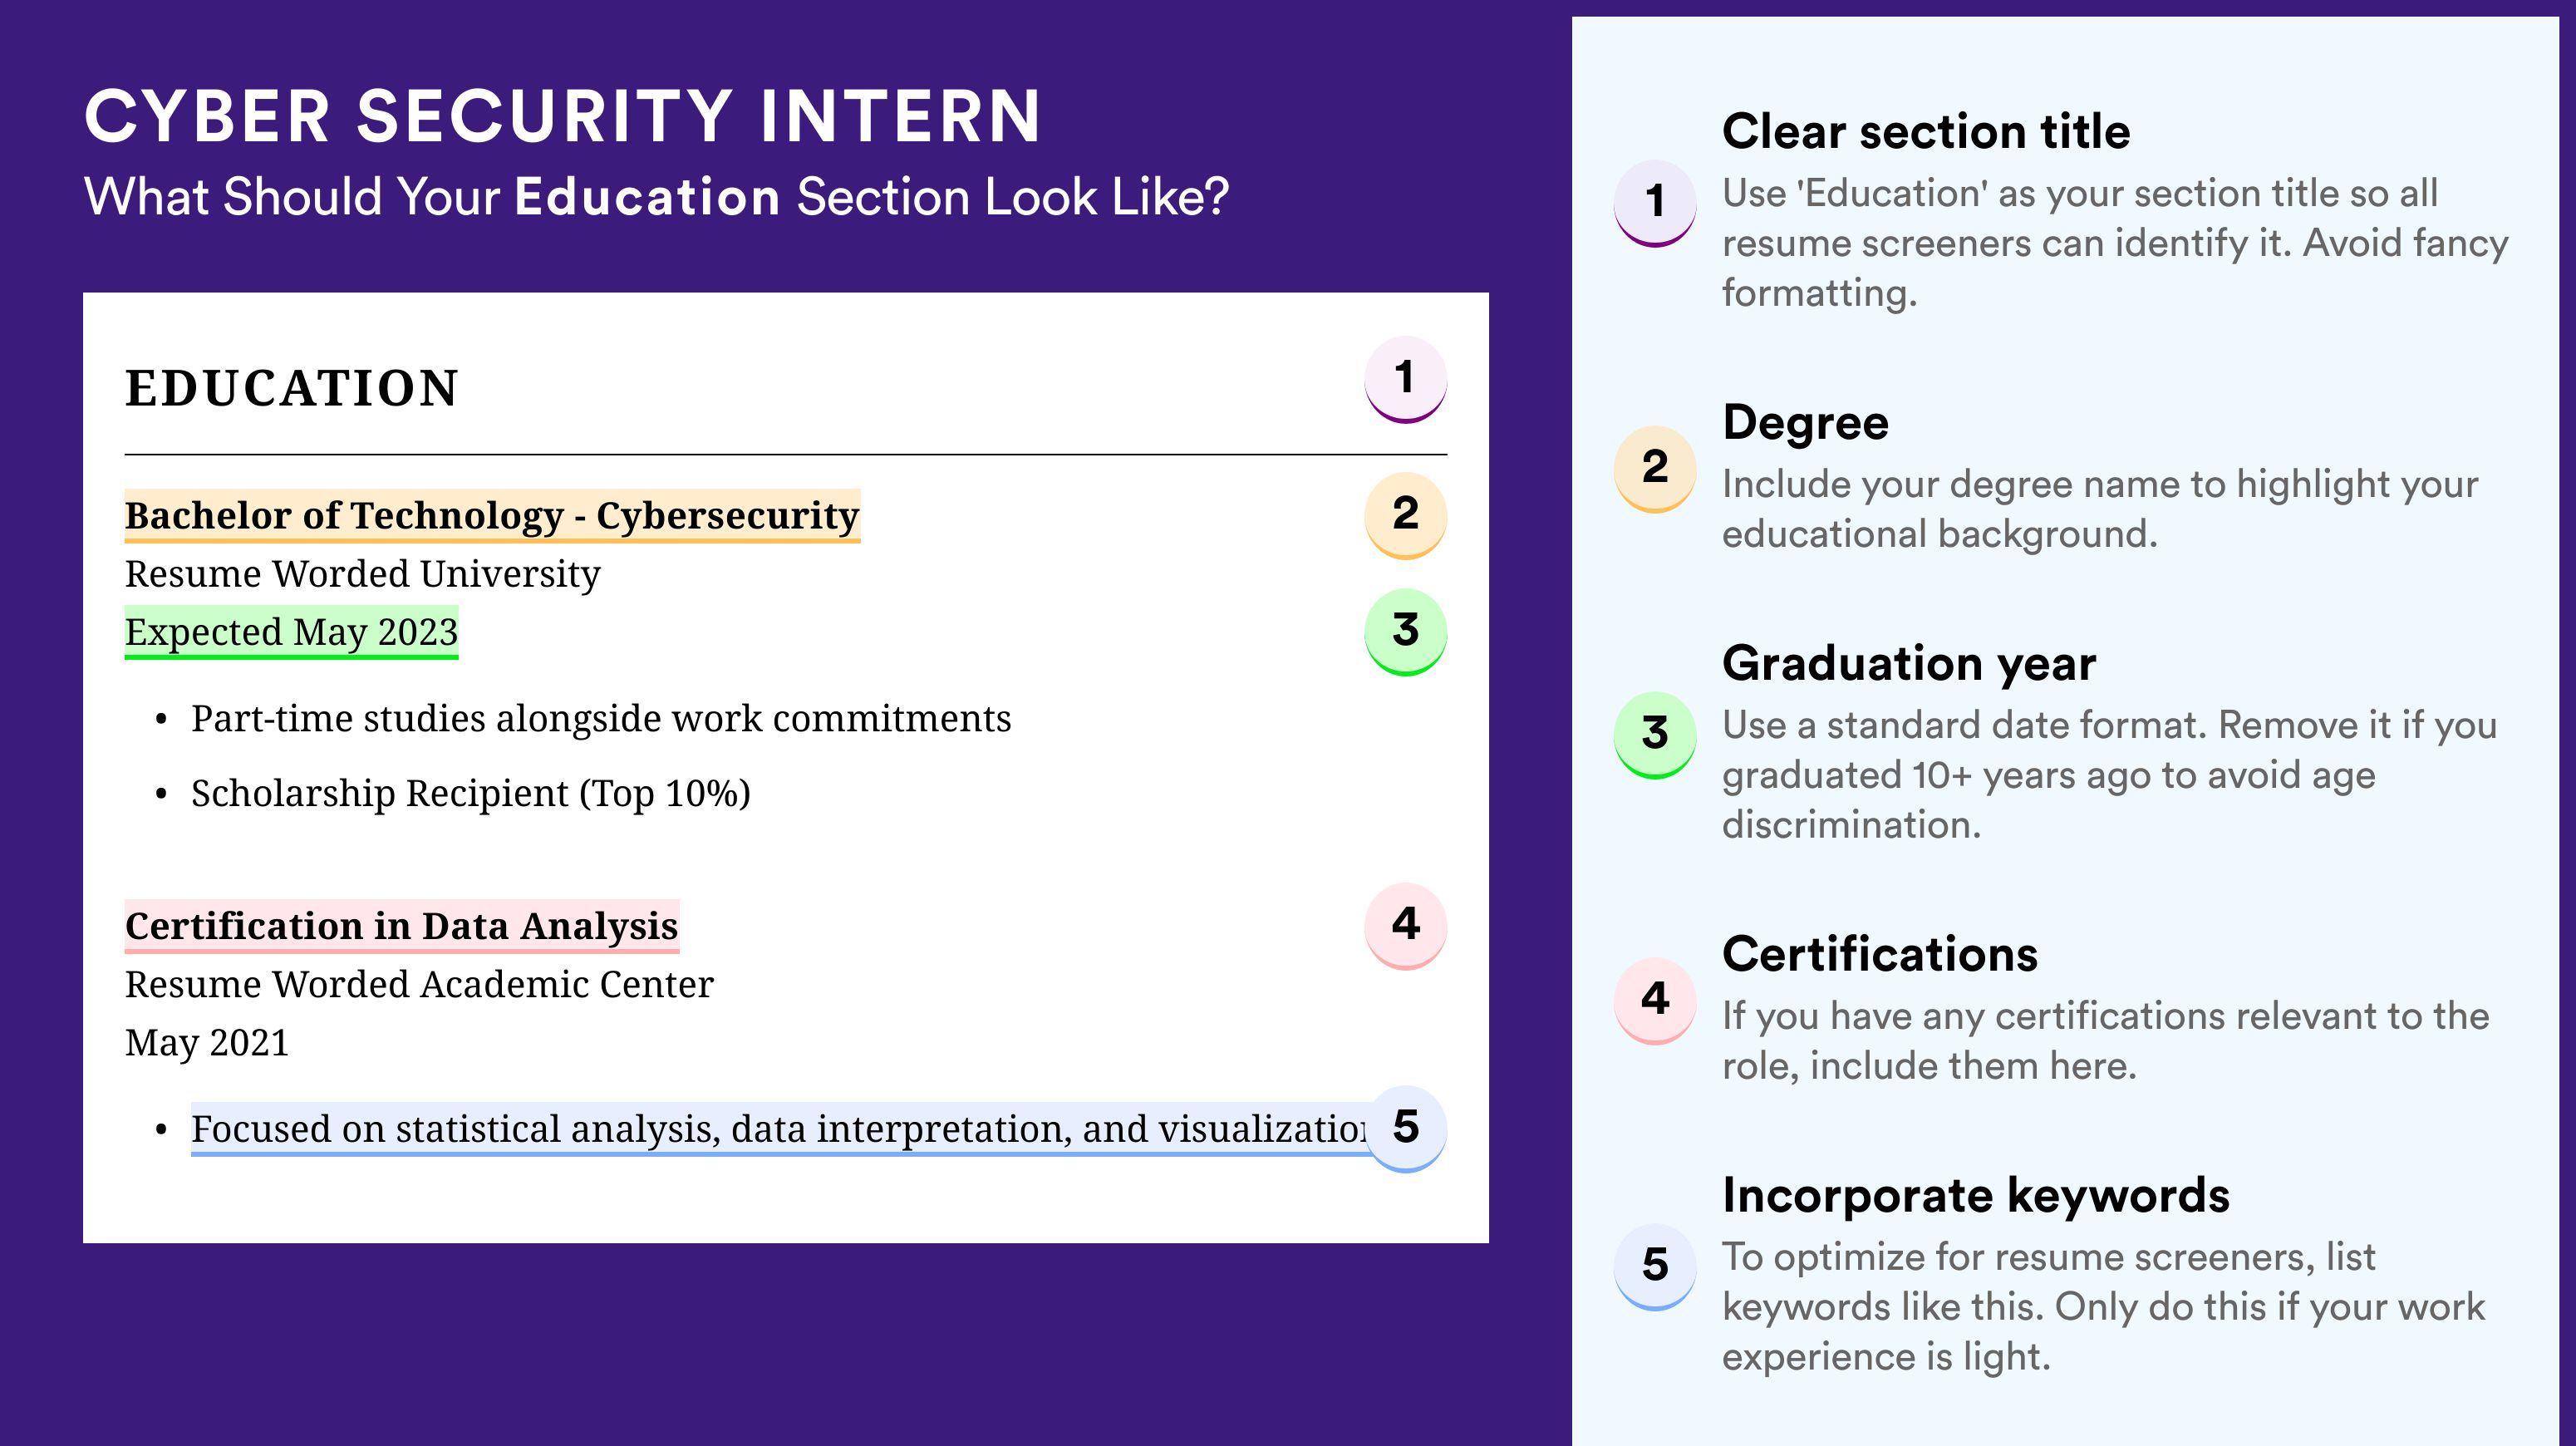 How To Write An Education Section - Cyber Security Intern Roles